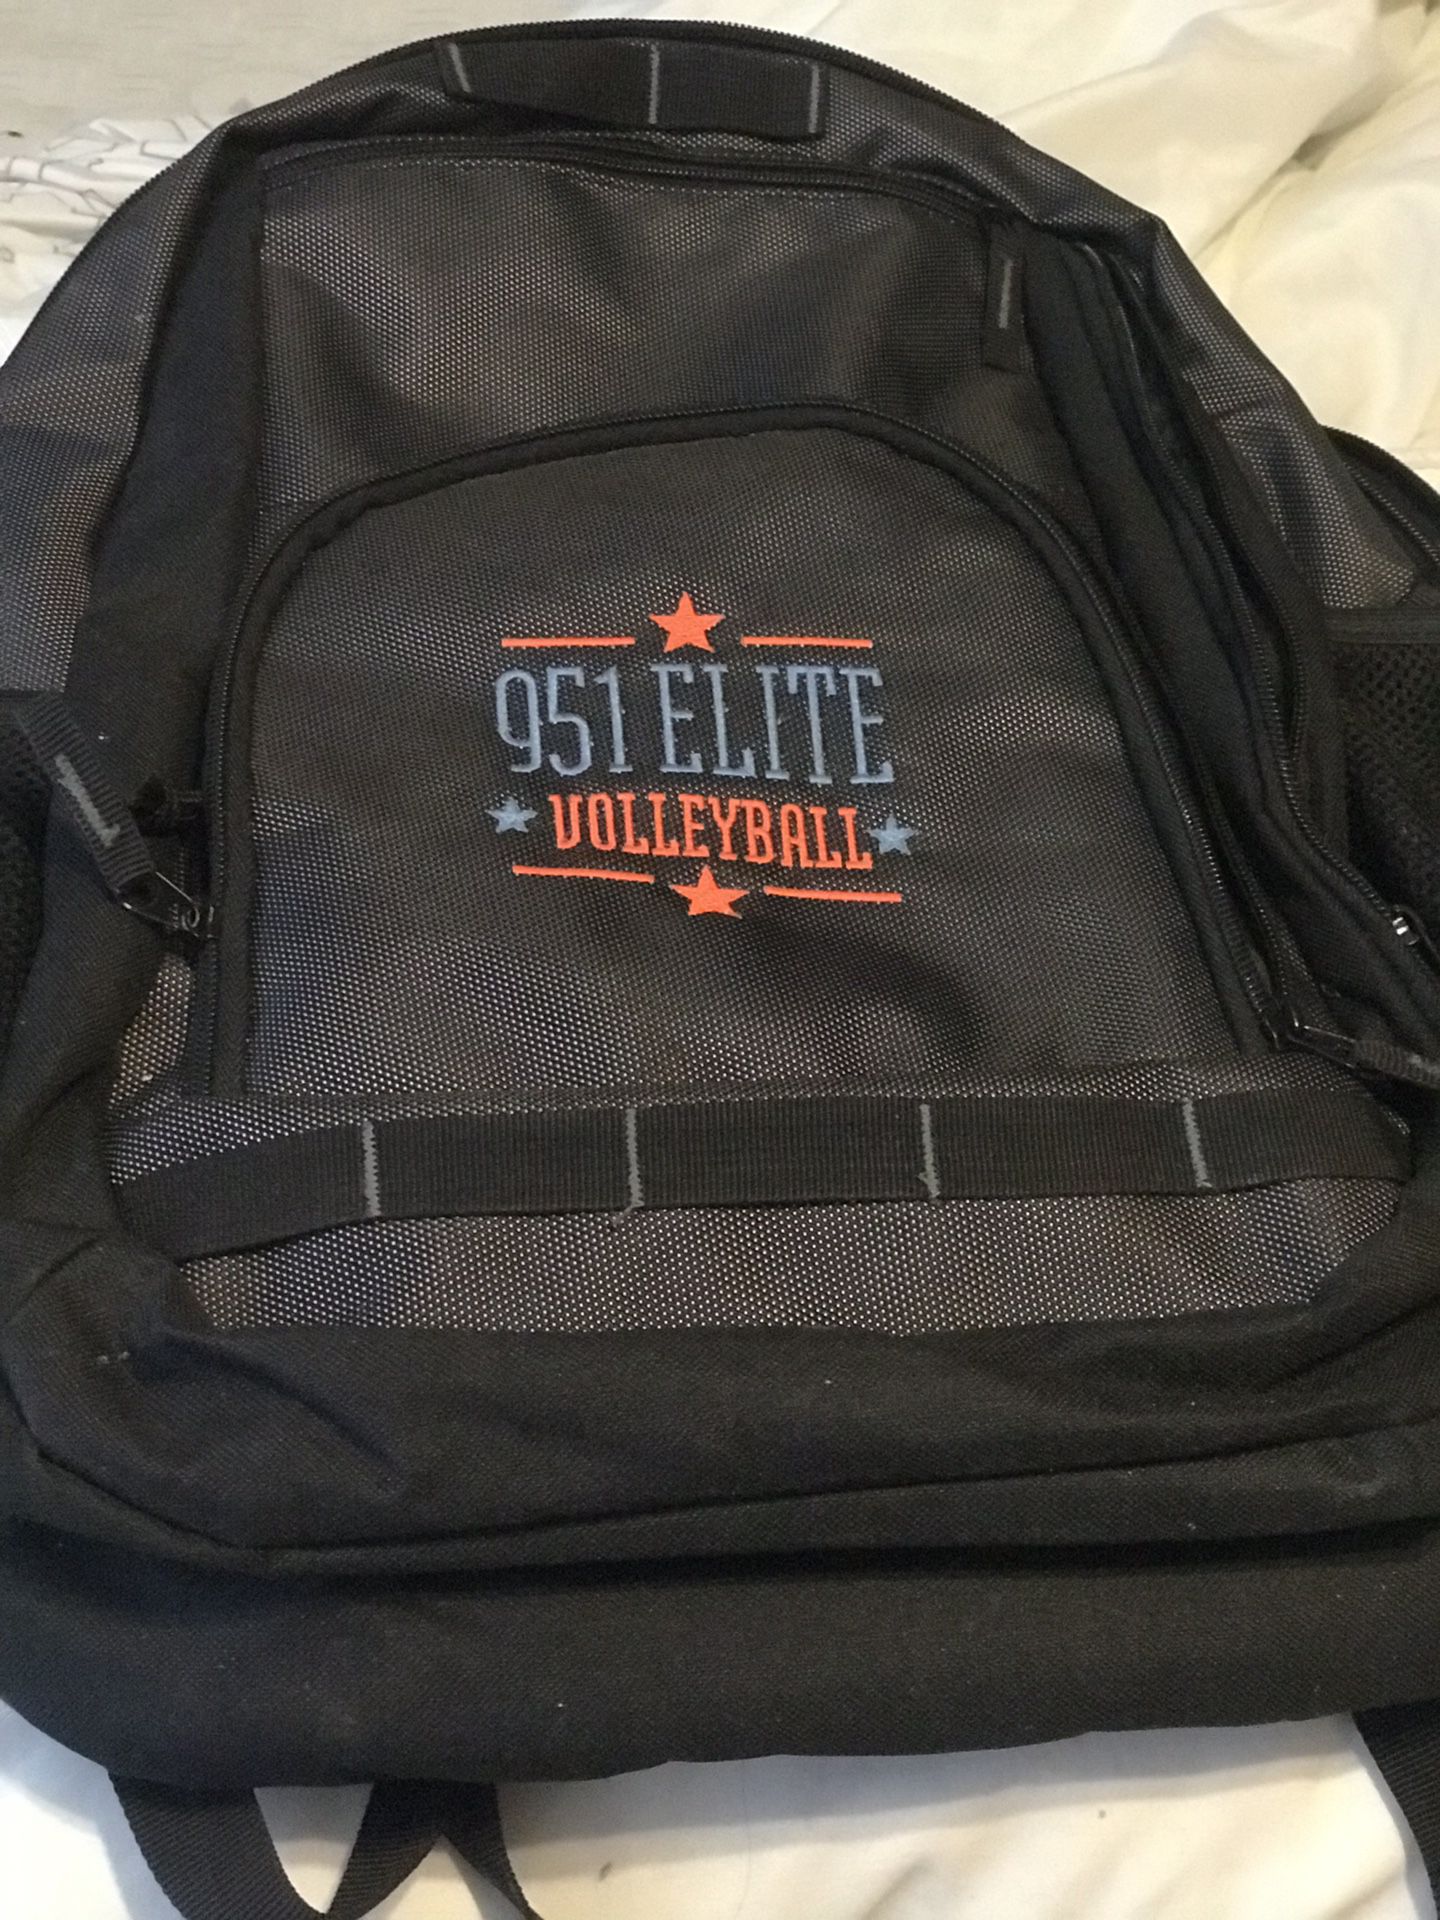 volleyball backpack